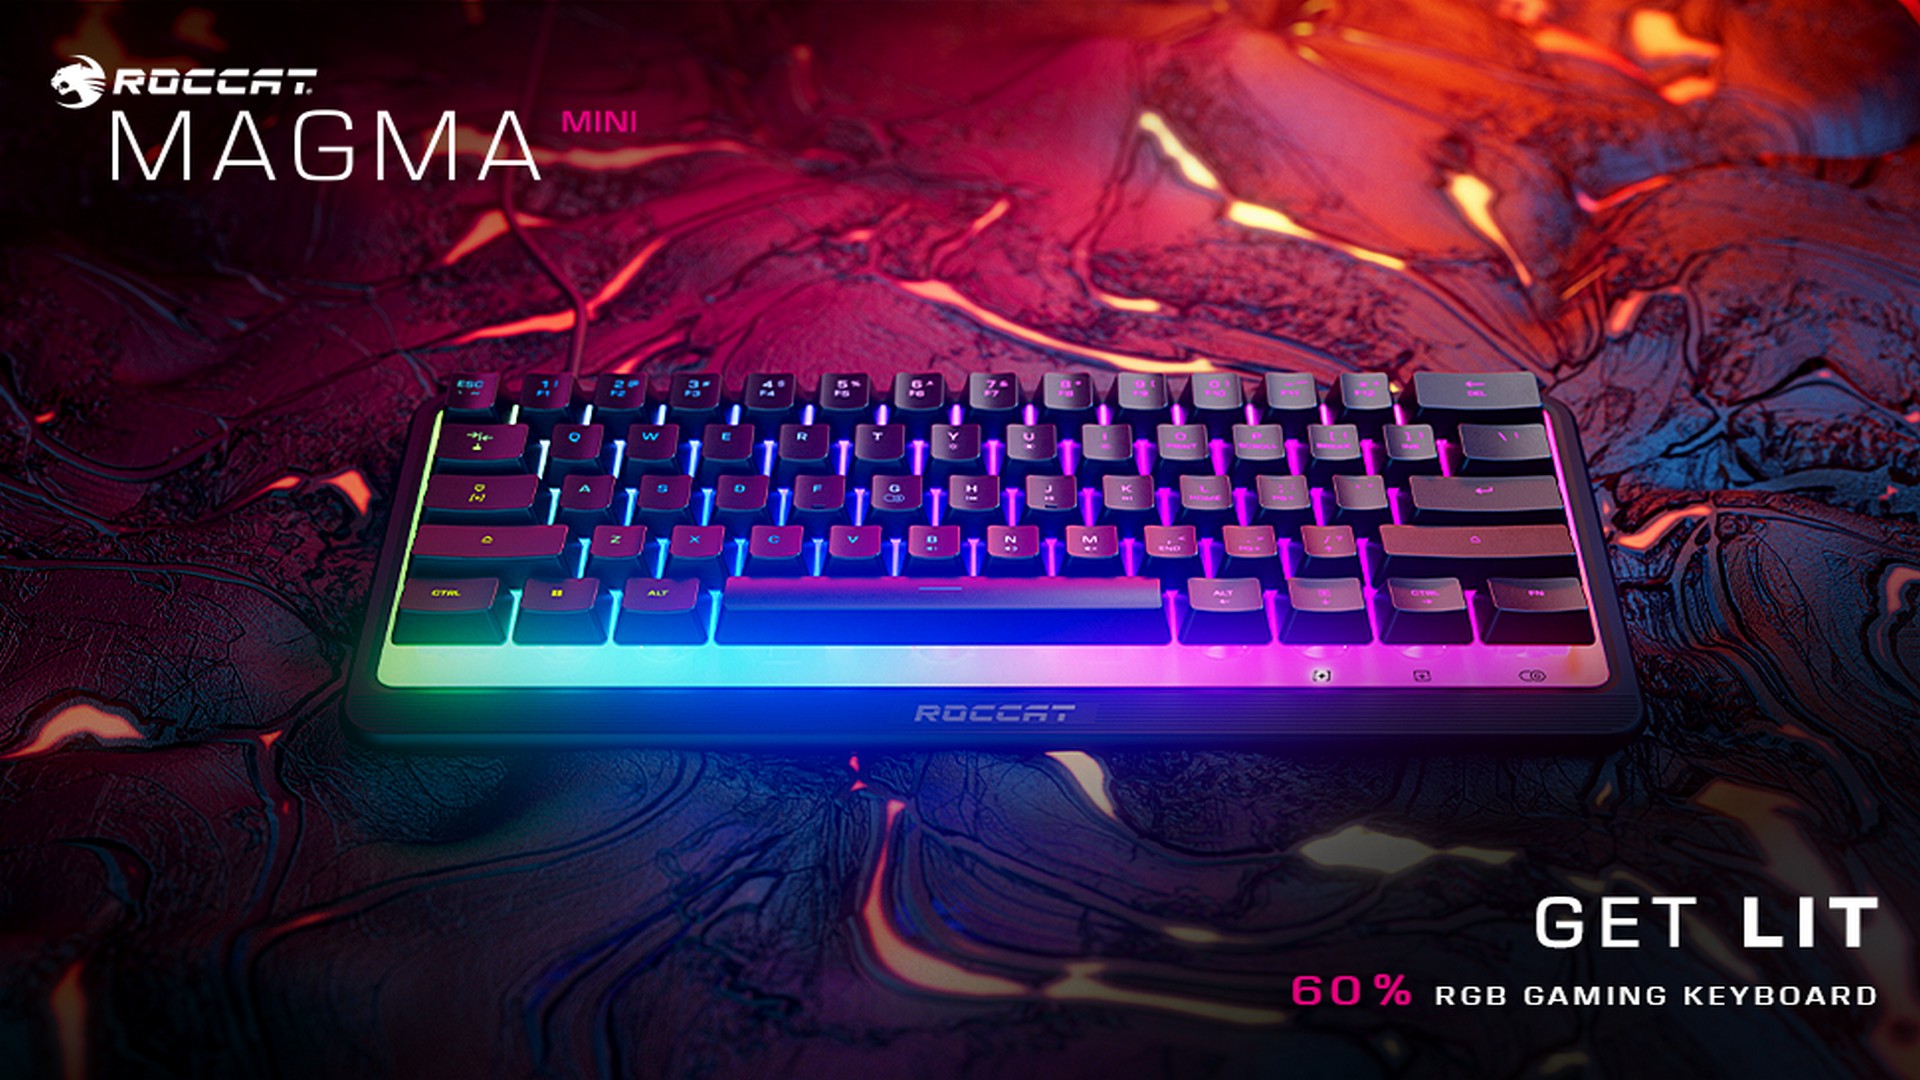 ROCCAT’s Stunning Magma Mini 60% RGB Gaming Keyboard Is Now Available